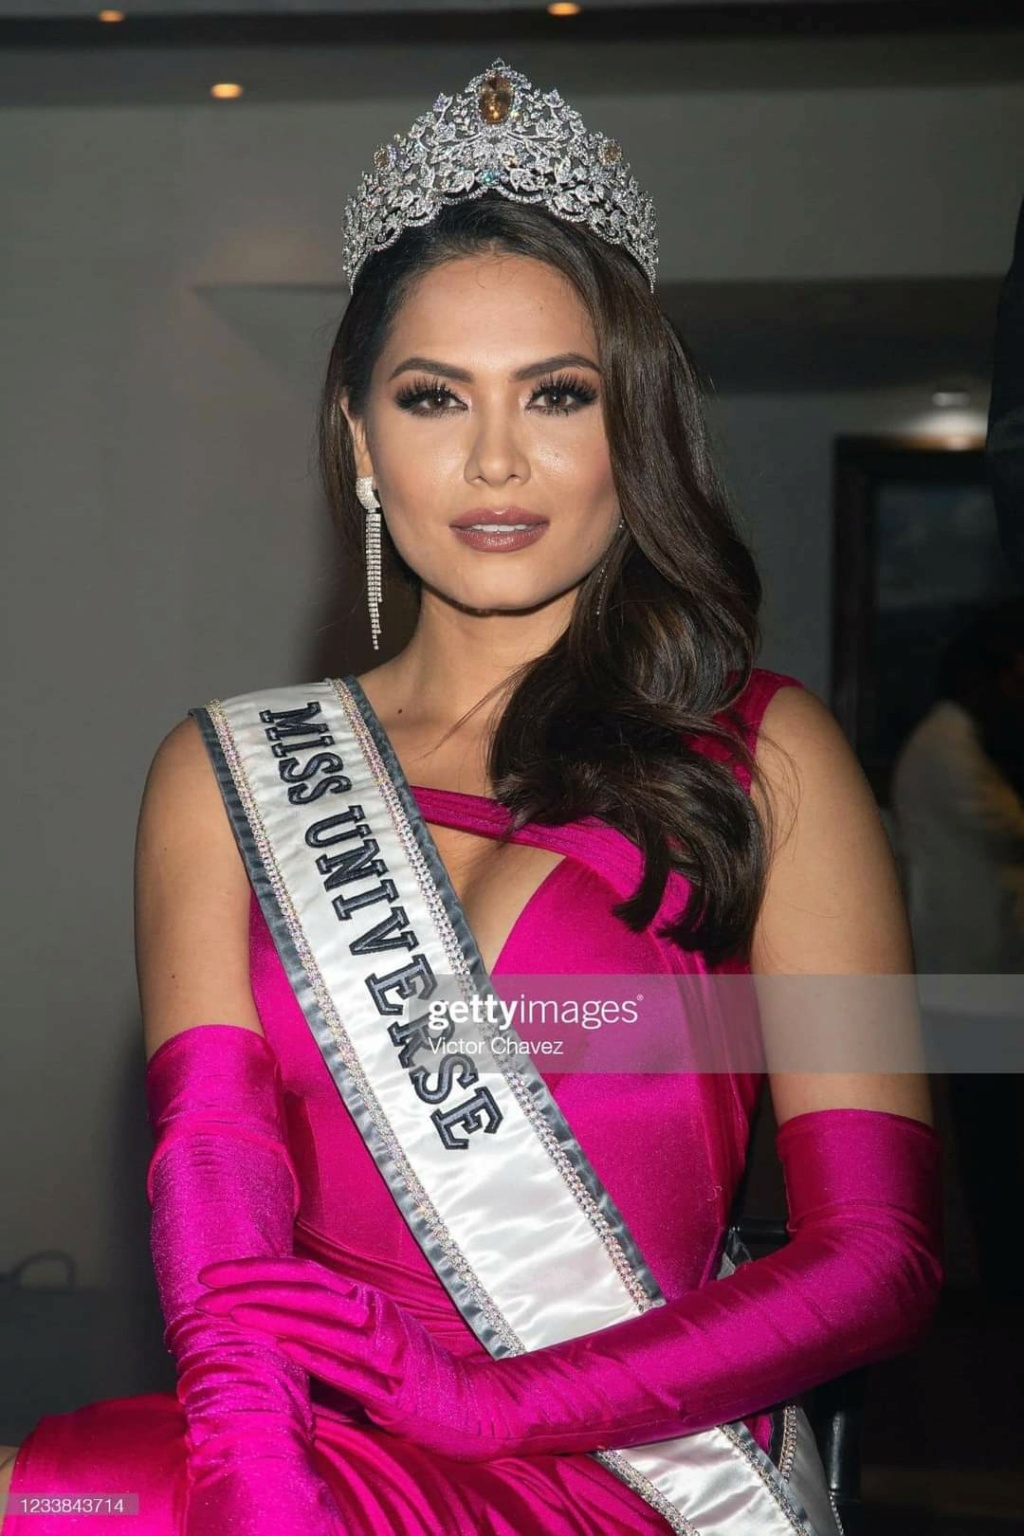 The Official Thread Of Miss Universe 2020 - Andrea Meza of Mexico  - Page 3 Fb_18330